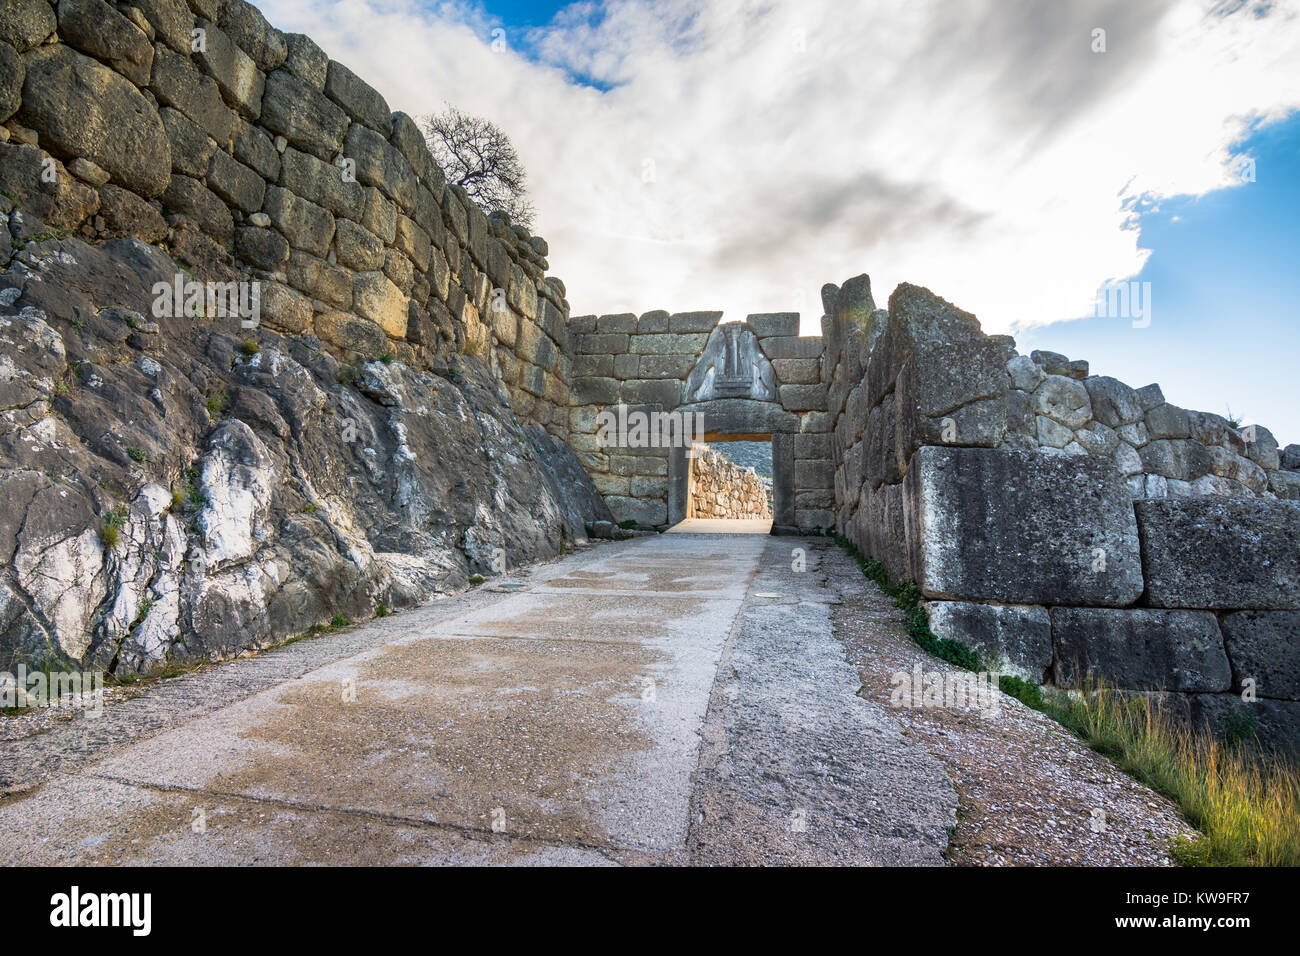 The archaeological site of Mycenae near the village of Mykines, with ancient tombs, giant walls and the famous lions gate,  Peloponnese, Greece Stock Photo